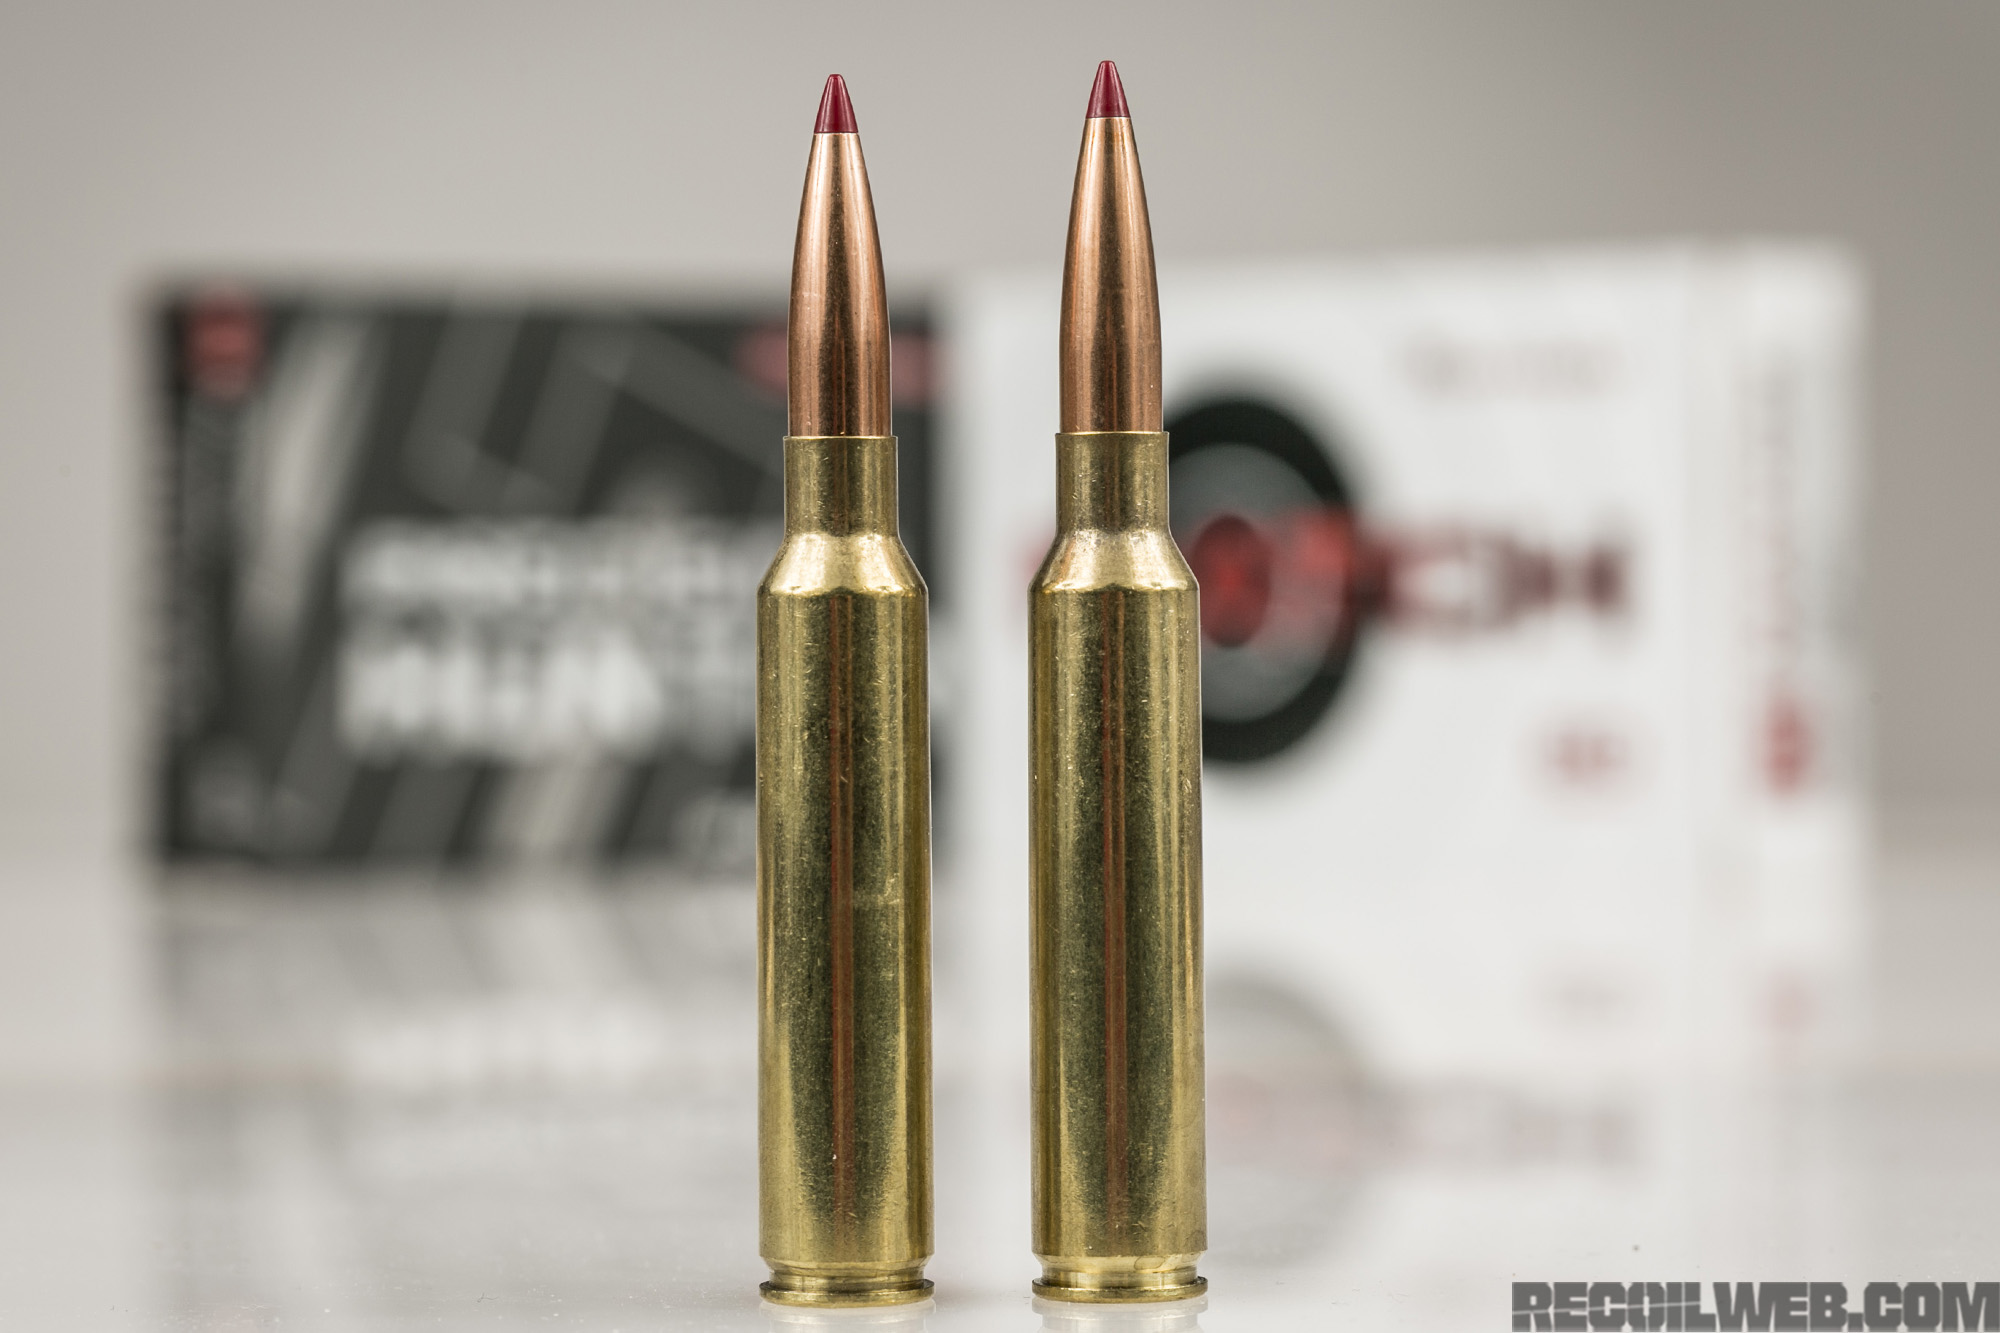 300 Prc From Hornady Sets New Standard Built To Win Recoil.